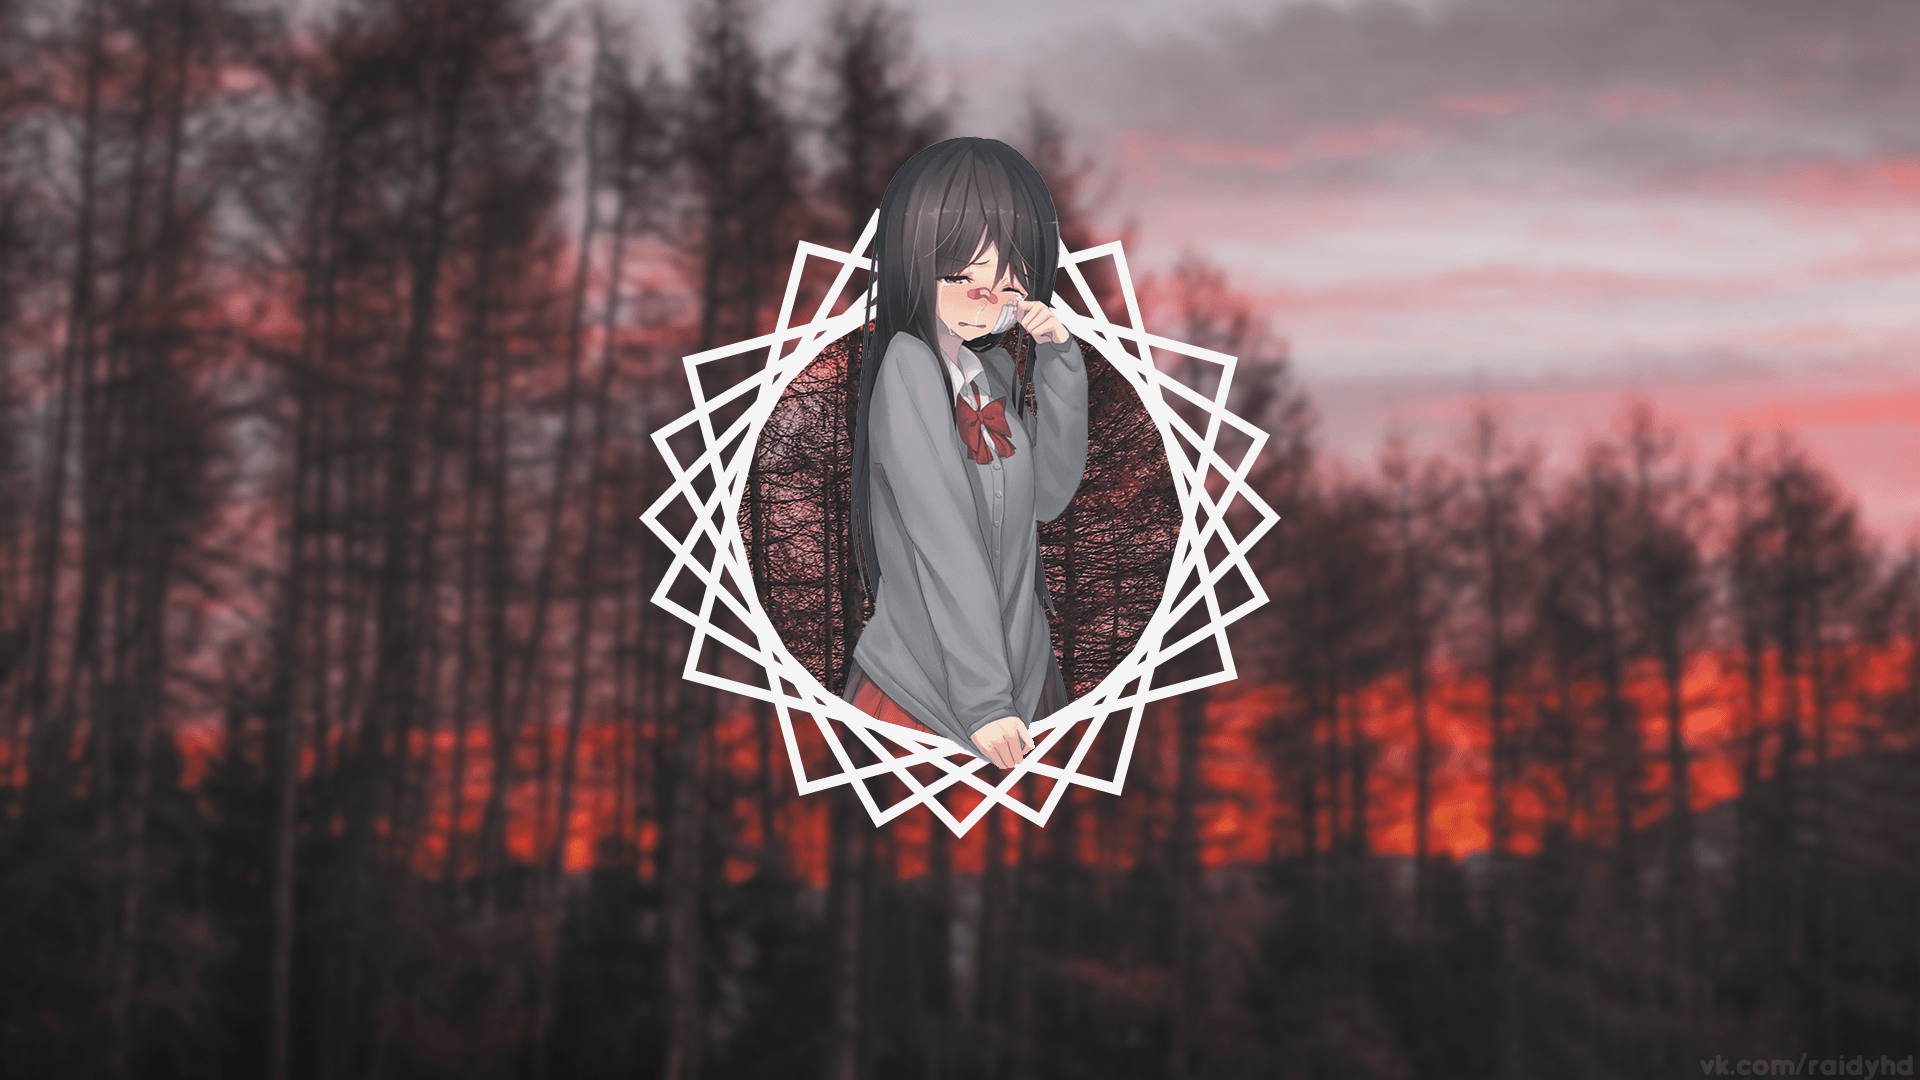 Wallpaper, nature, anime girls, sad, forest, sunset, HDR, picture